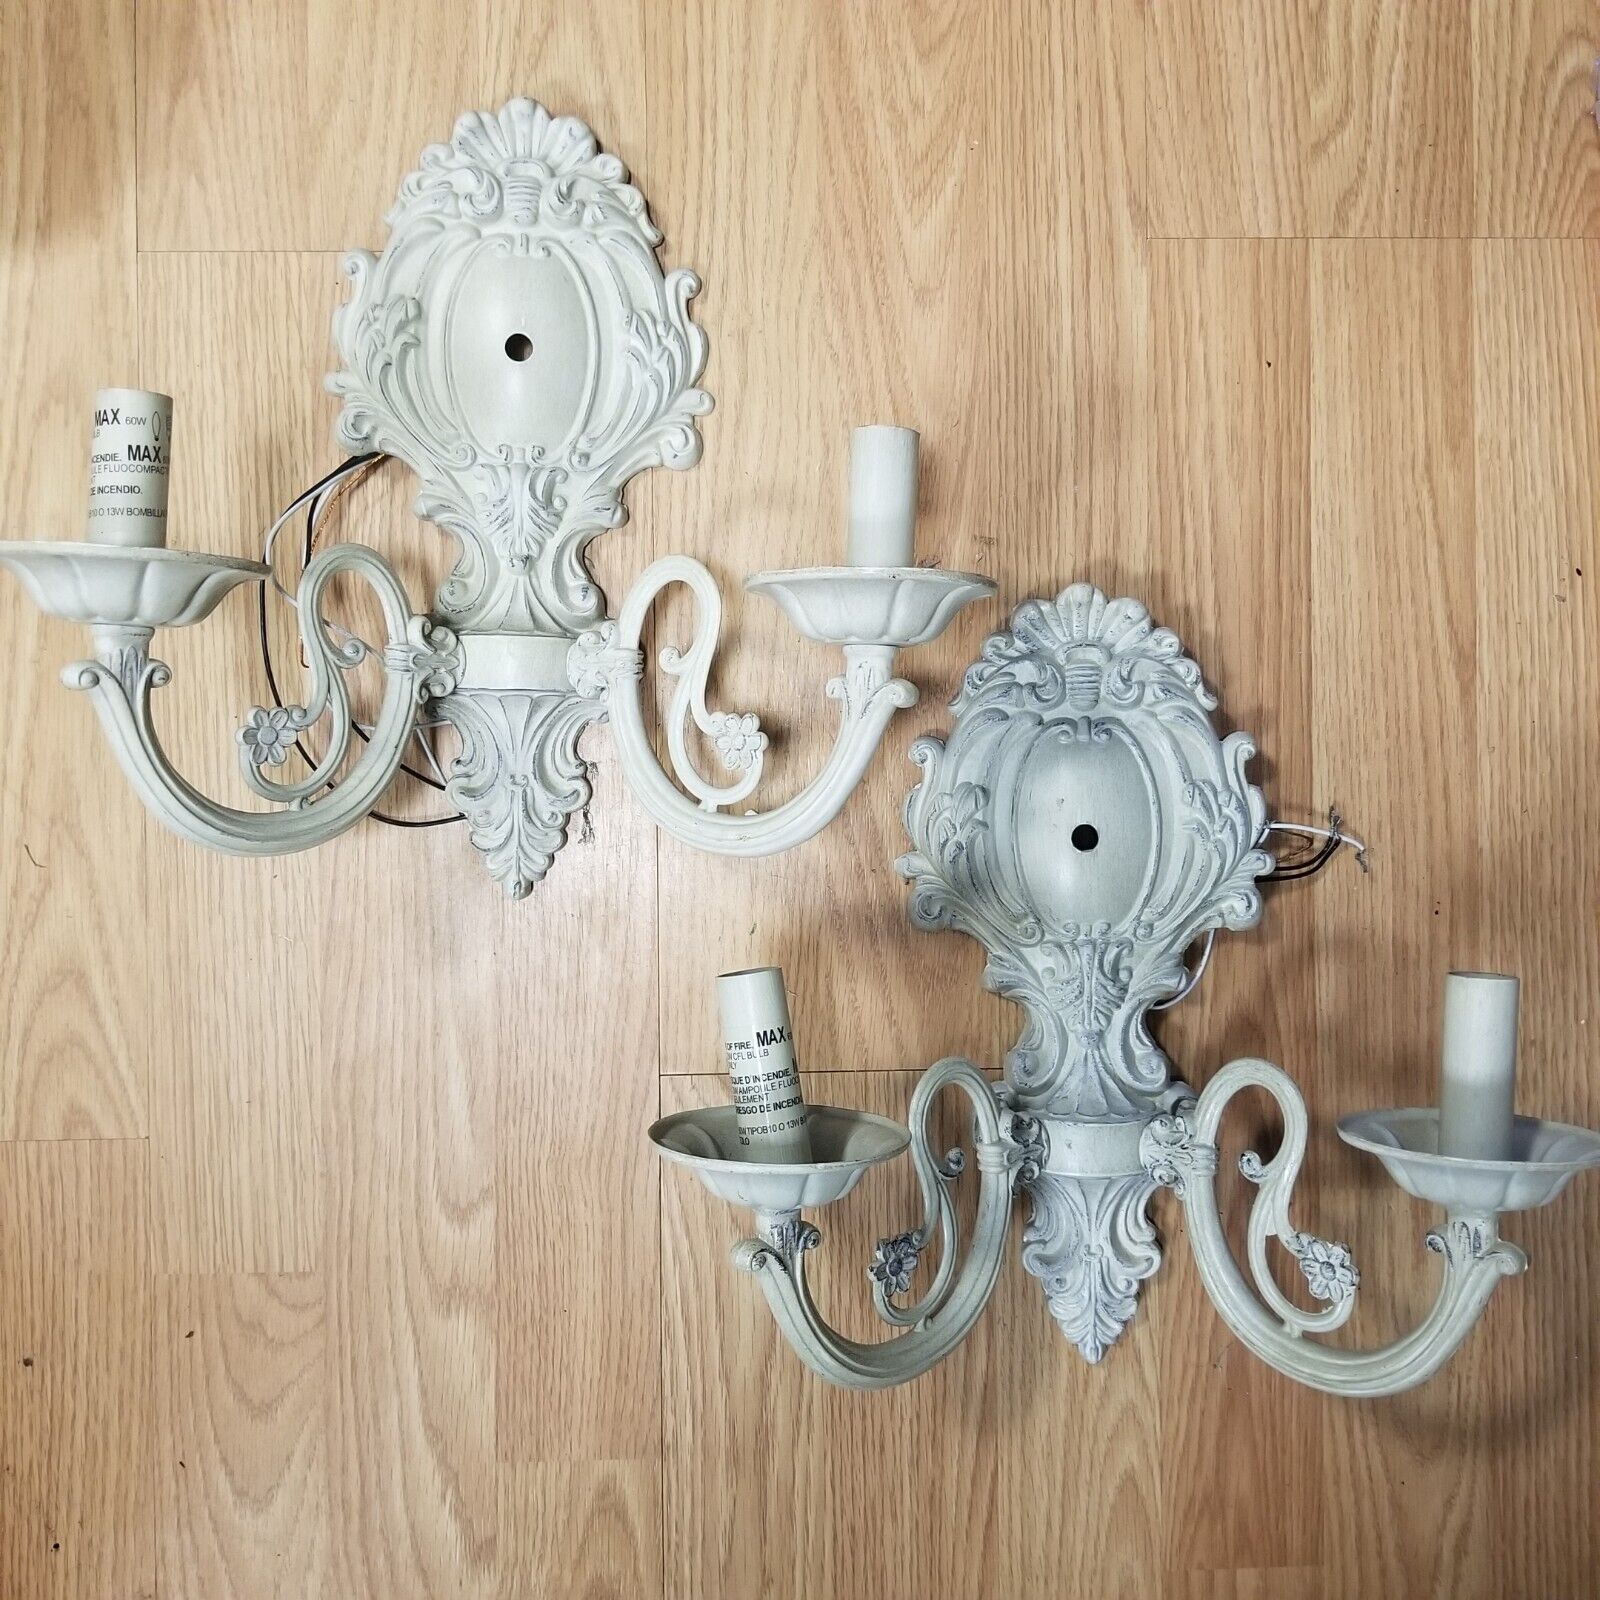 Pair of Metal Candle Electric Wired Wall Sconces Candelabras French Country